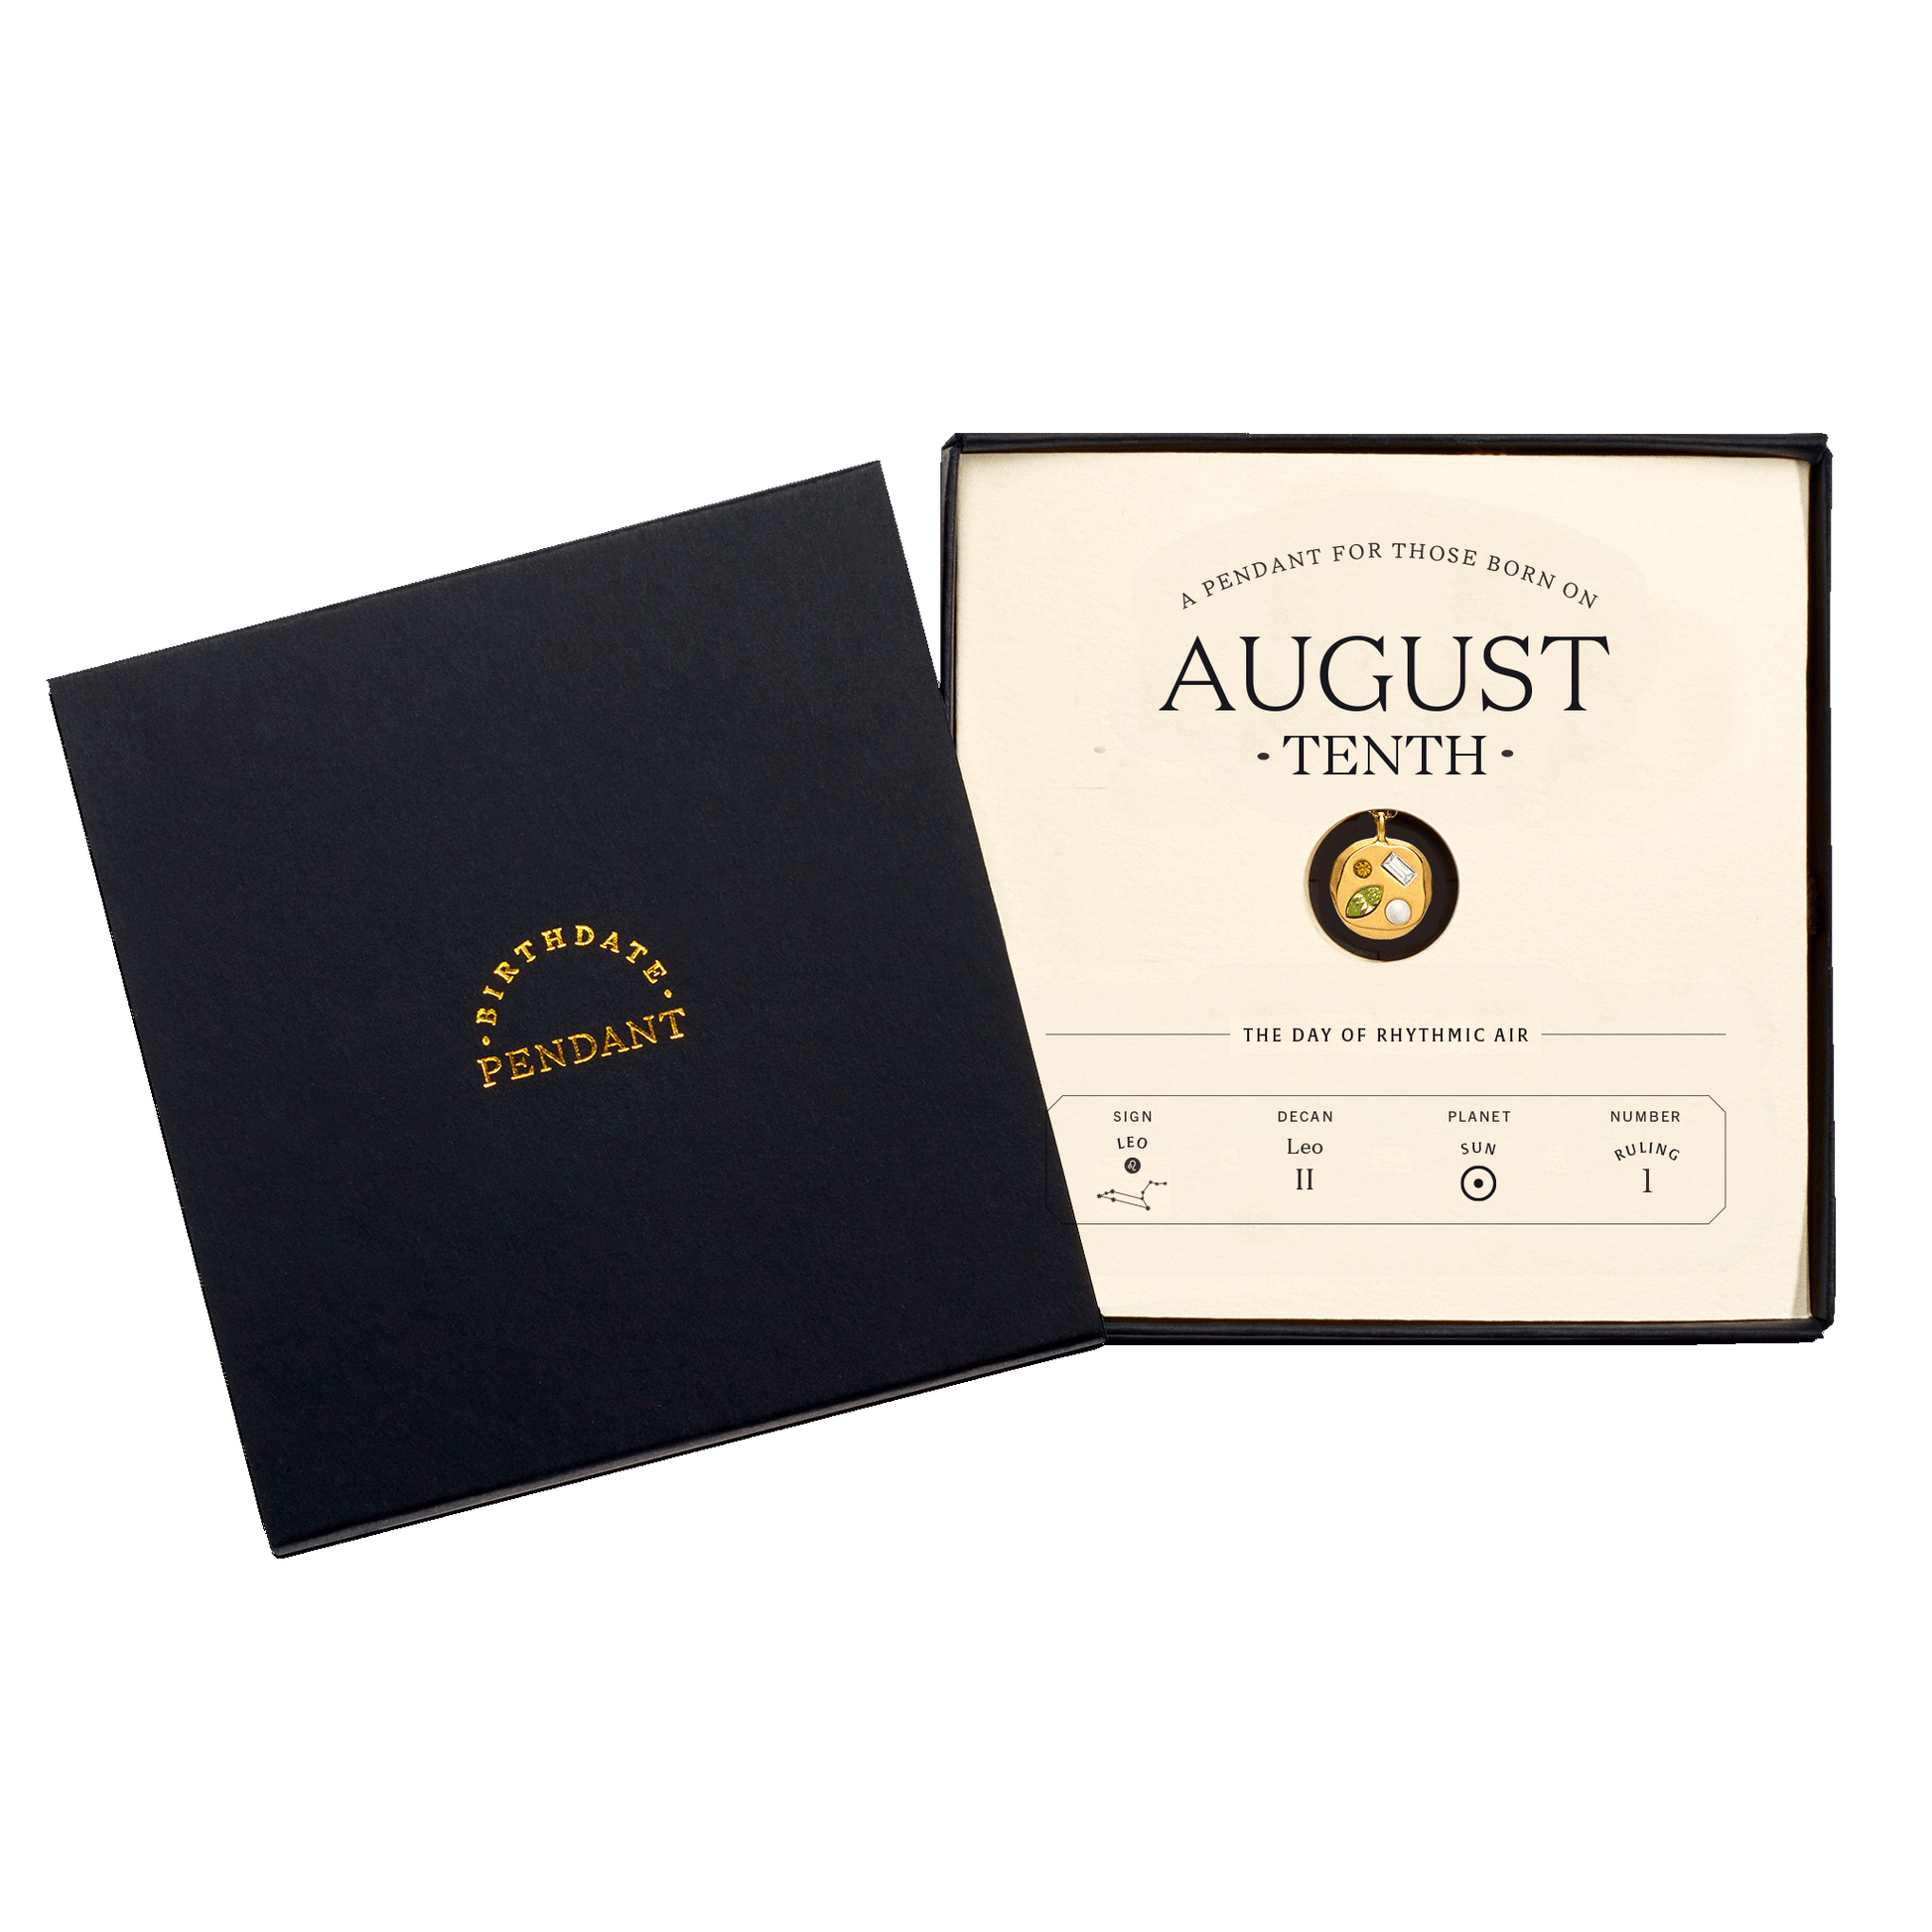 The August Tenth Pendant inside its box